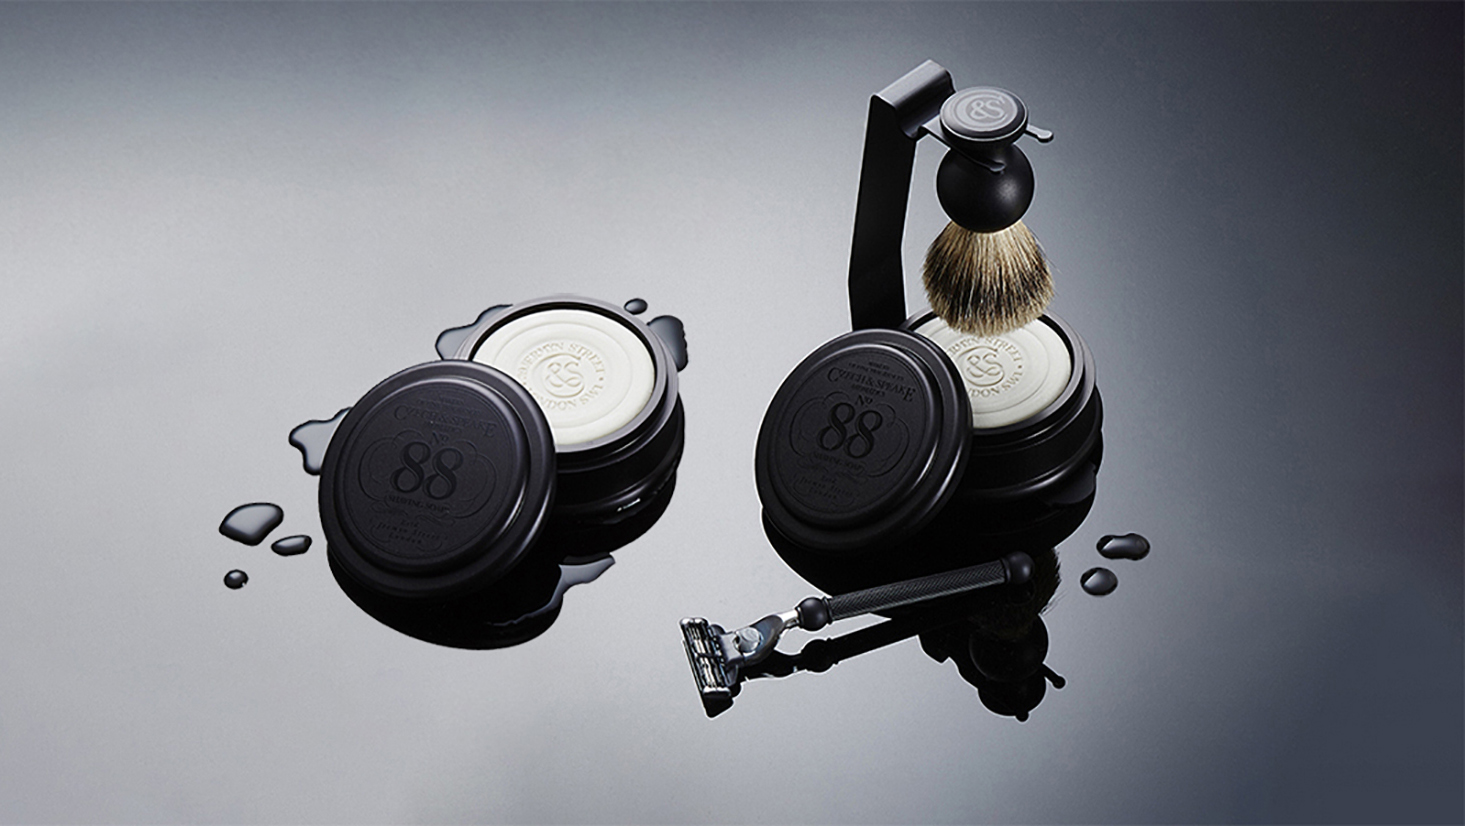 The No.88 Shaving Set &amp; Stand moody image